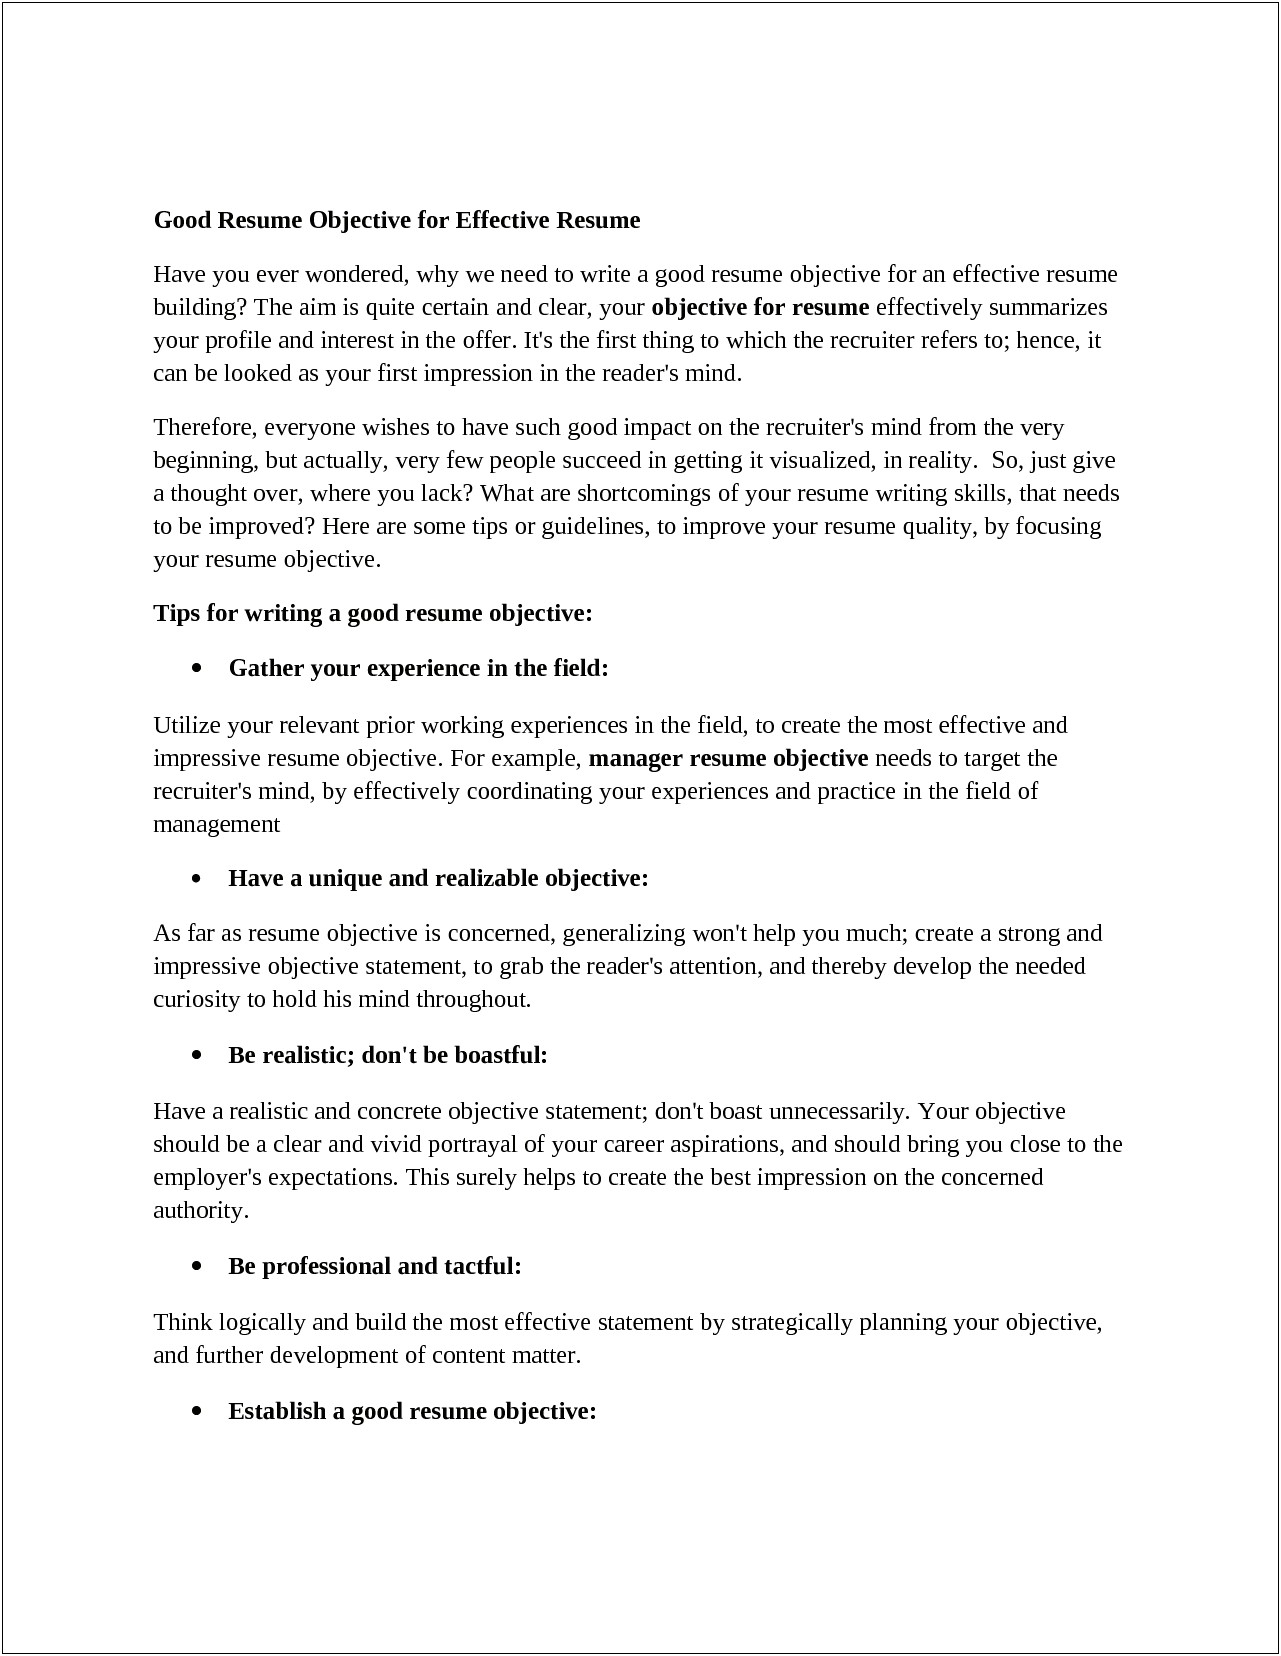 Resume Writing Tips Objective Statement